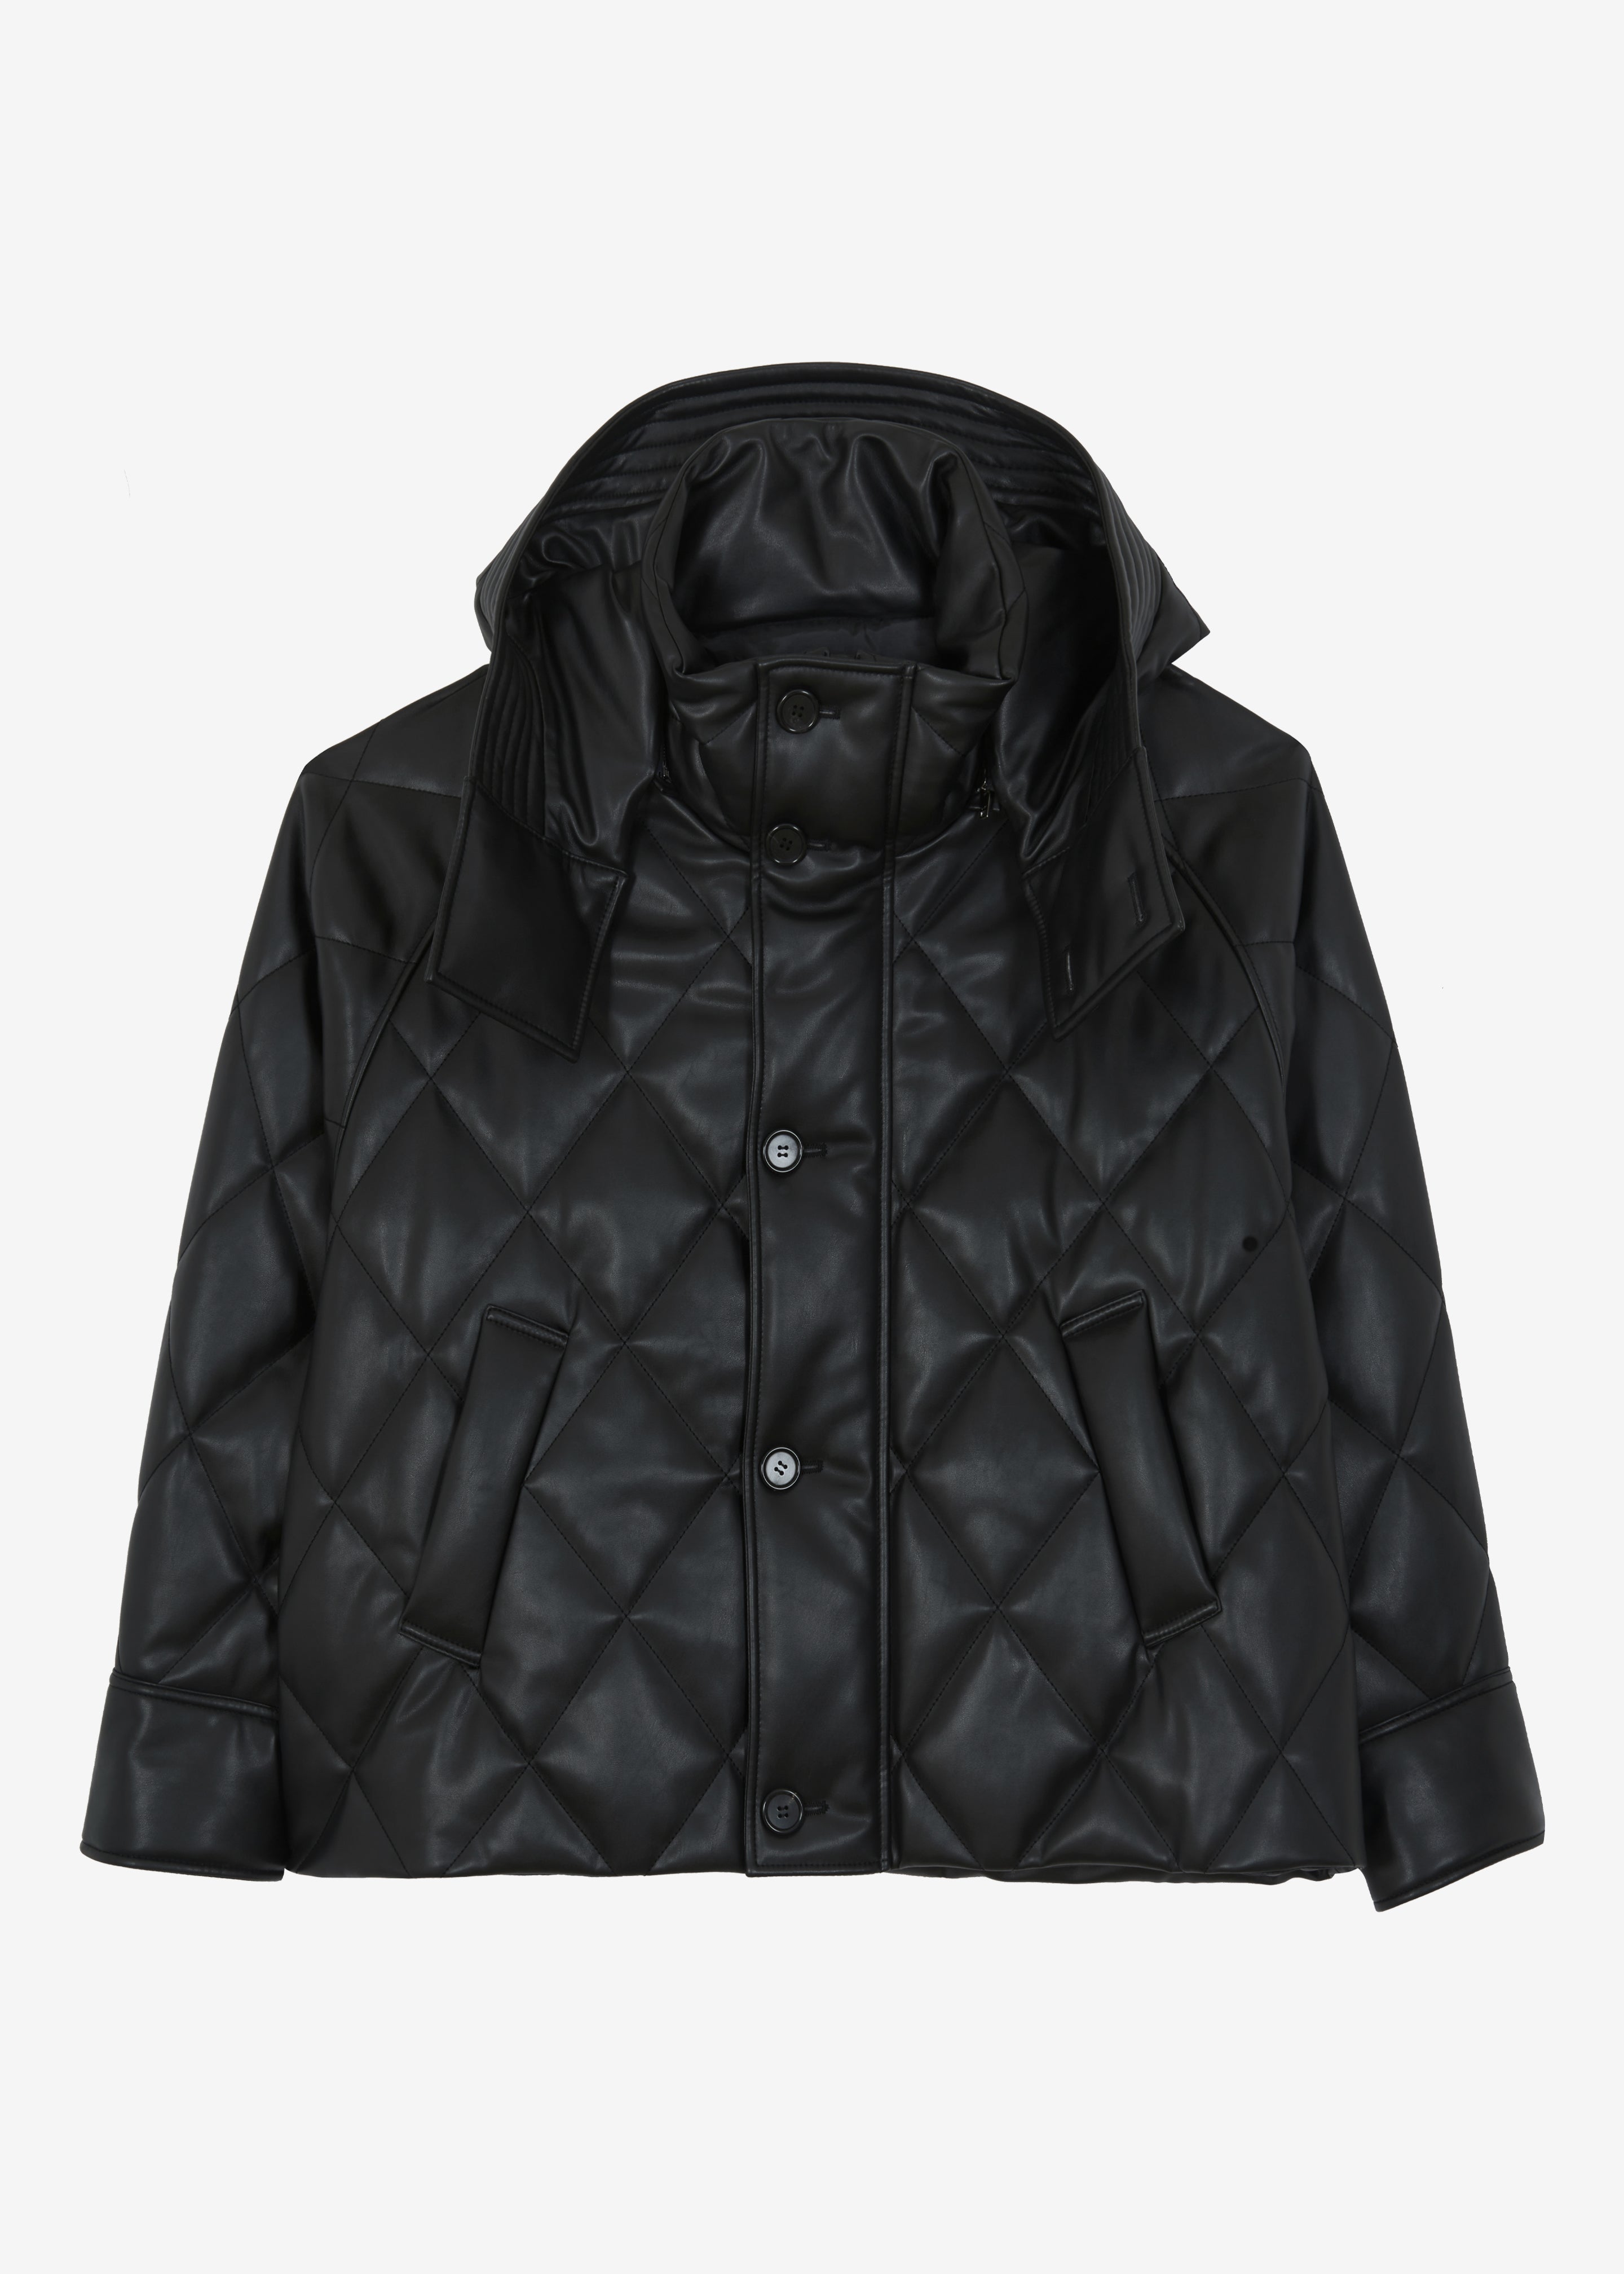 Kingston Faux Leather Quilted Jacket - Black - 11